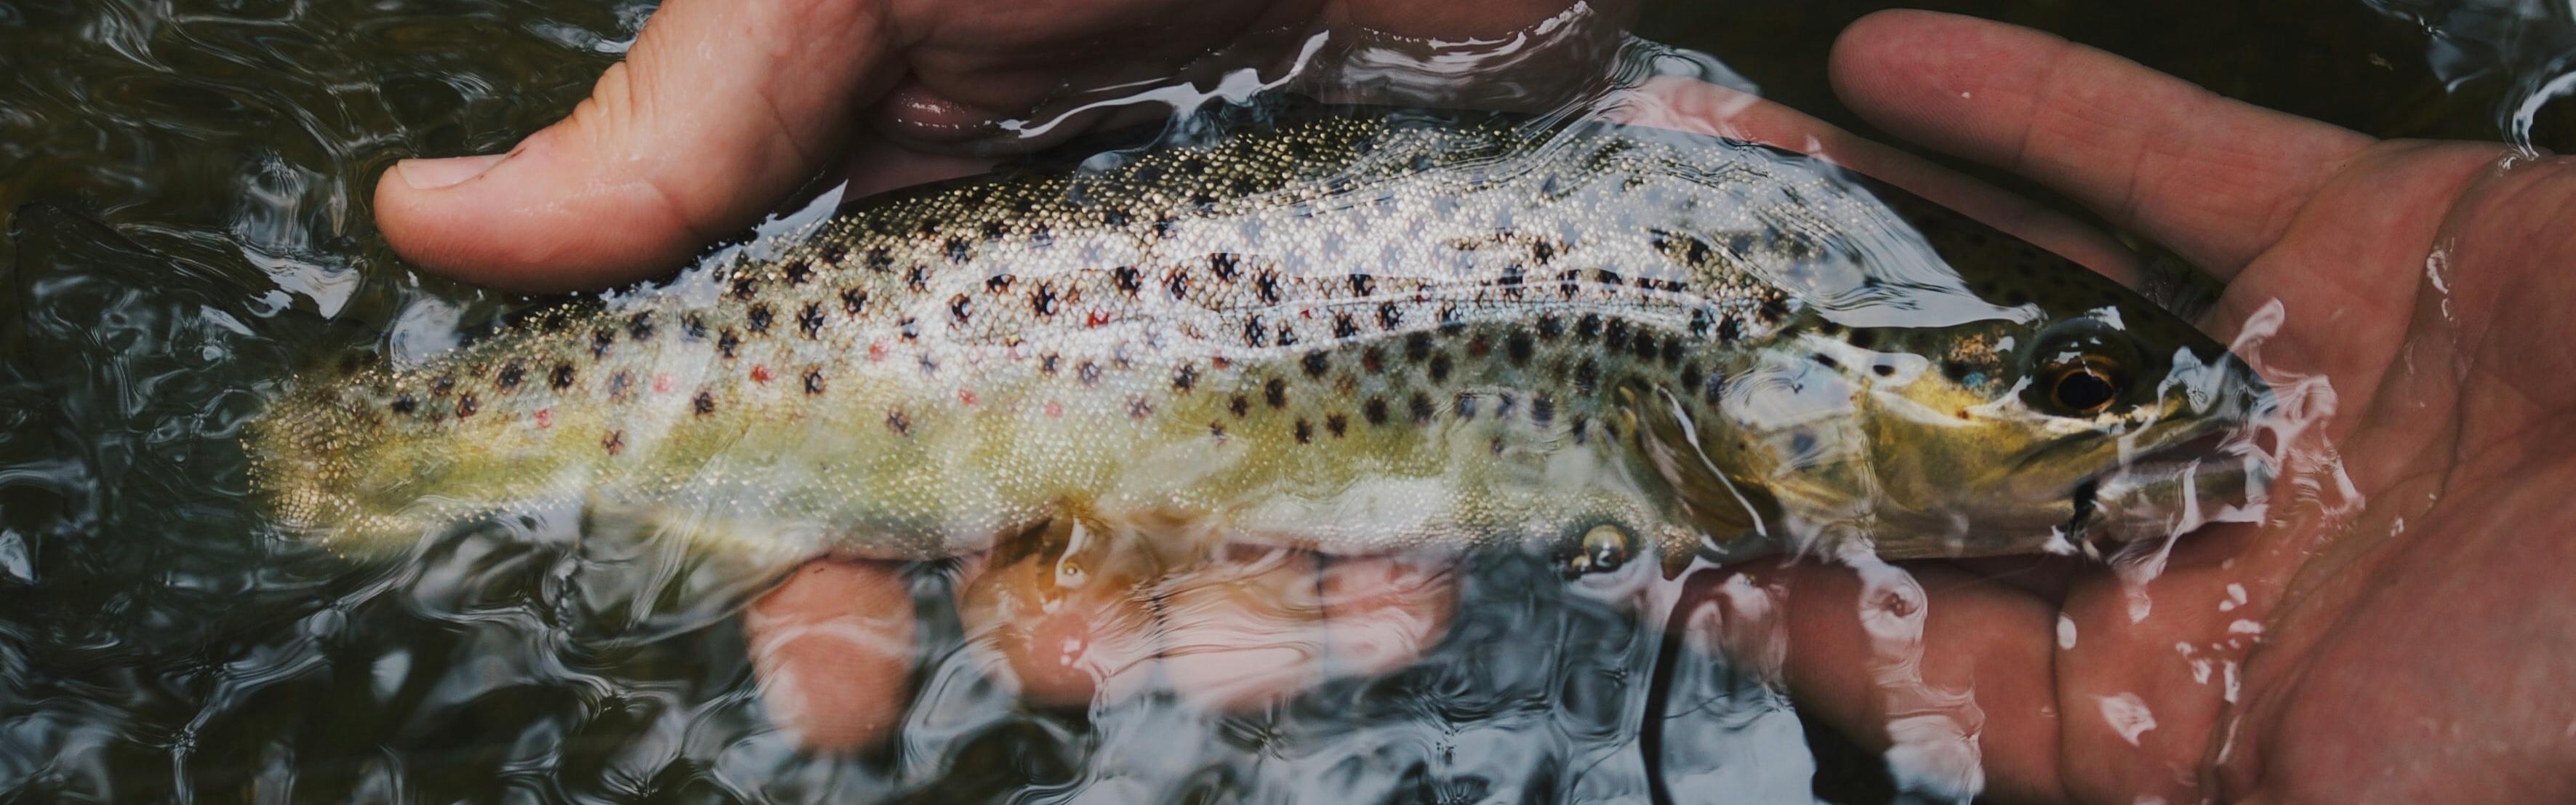 Trout Fishing Big Lakes, Part 2: The Deep Rig - Orvis News